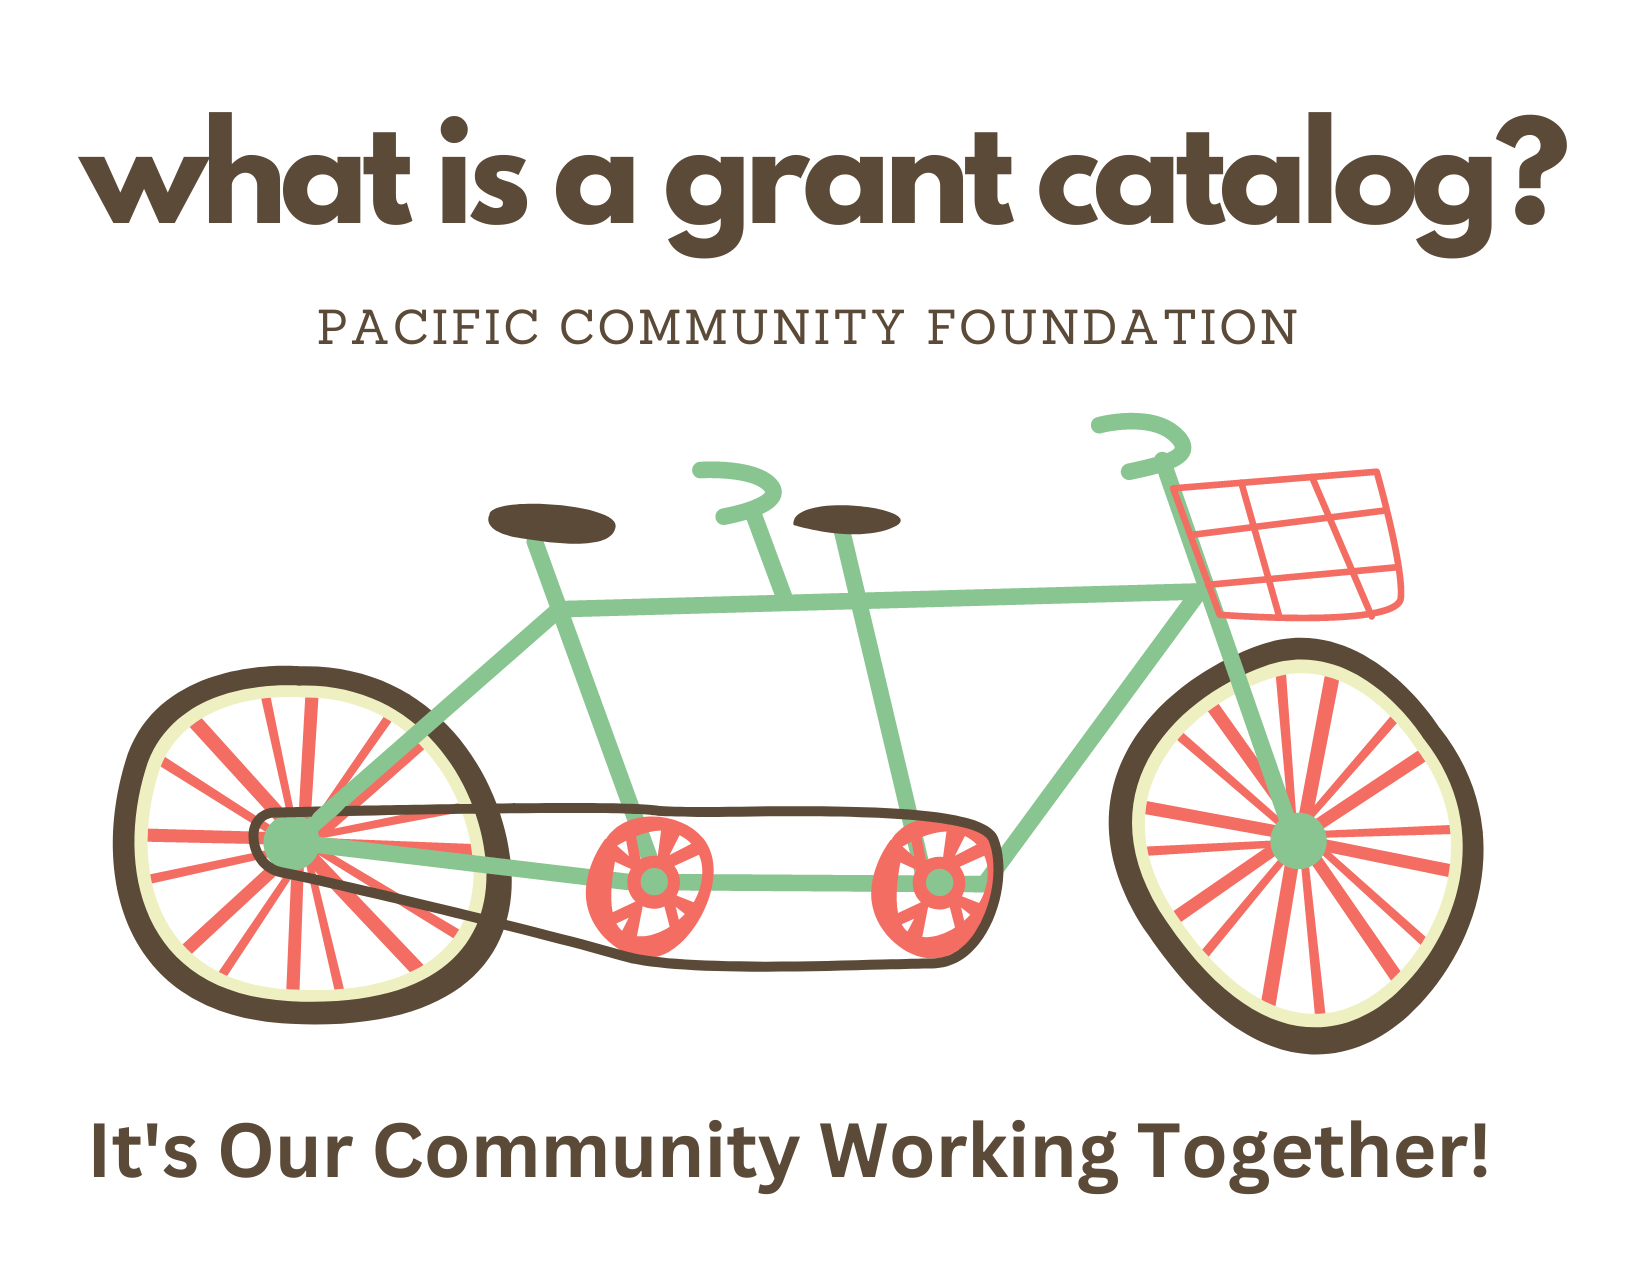 Engage in Grant-making through PCF’s Grants Catalog